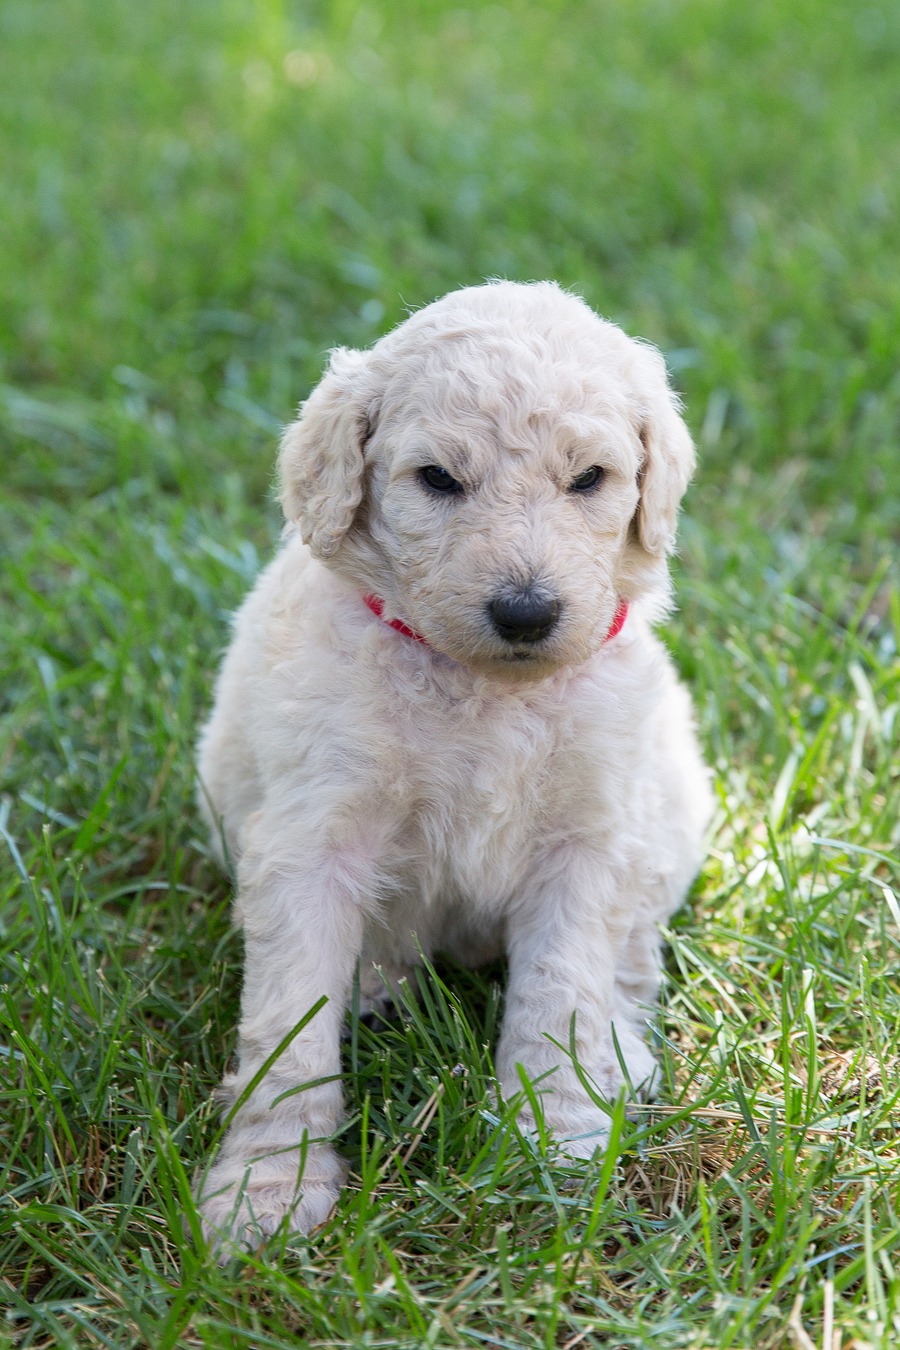 4 week old Puppies 2019 » Shelby's Standard Poodles